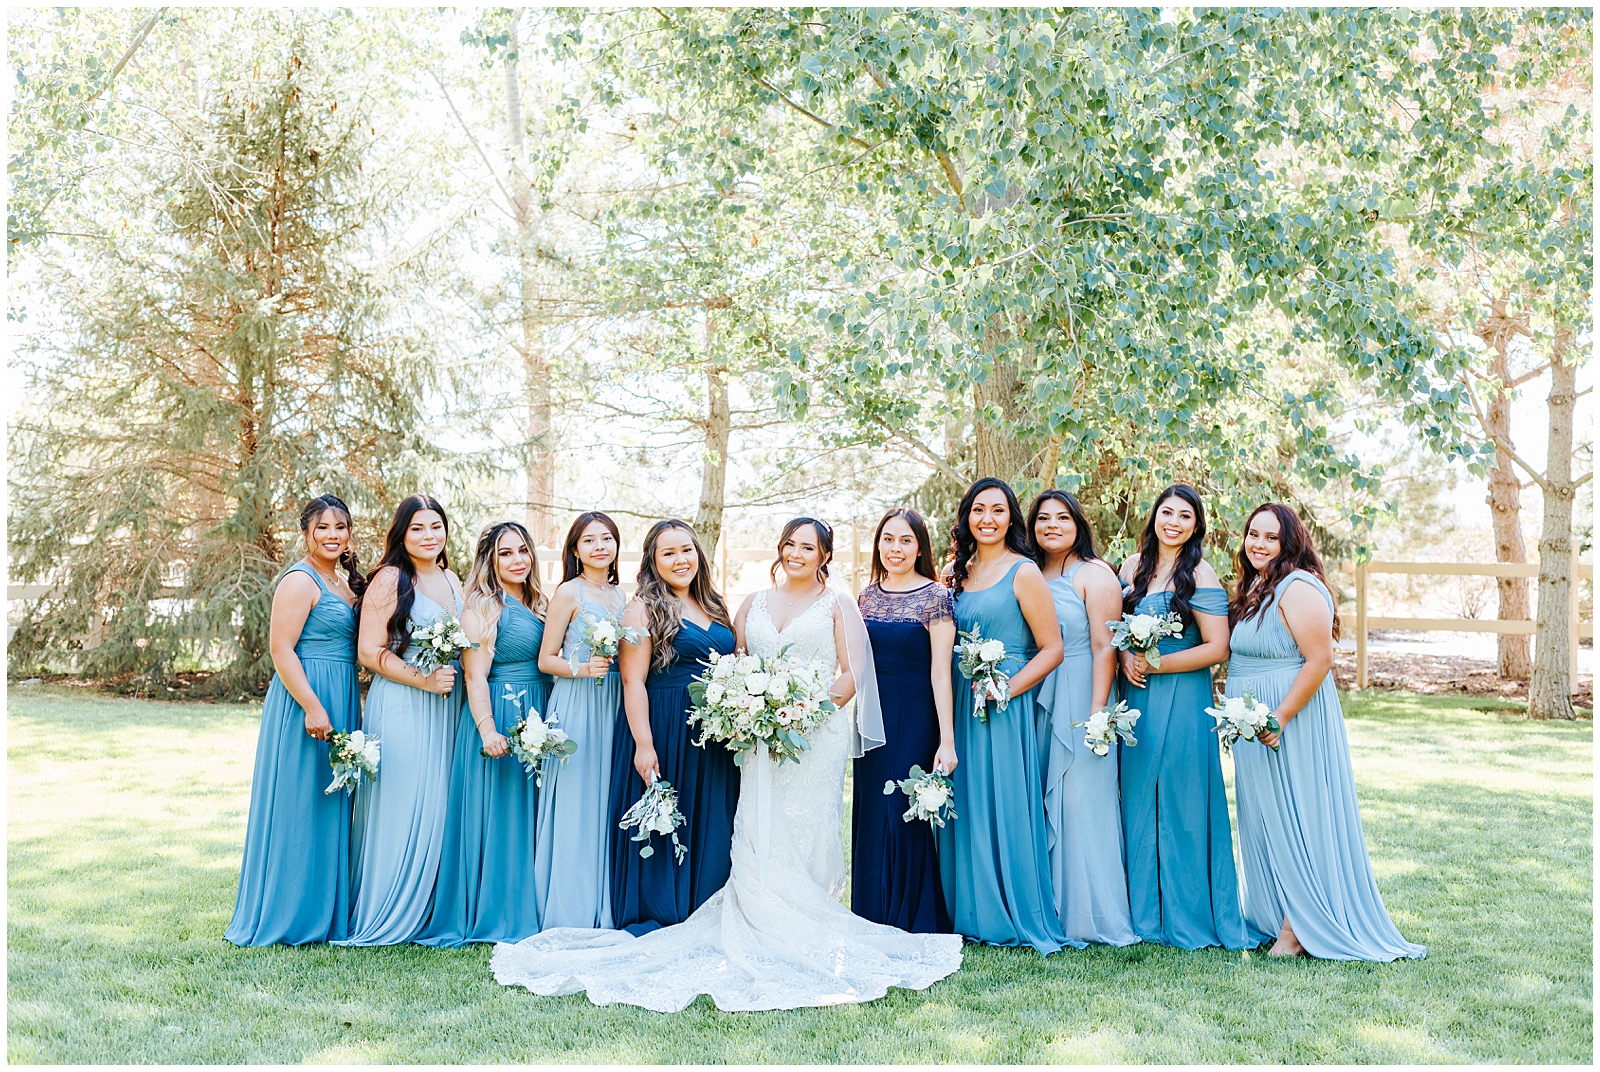 Bridal Party Bridesmaids in Mixture of Navy and Dusty Blue Floor Length Dresses